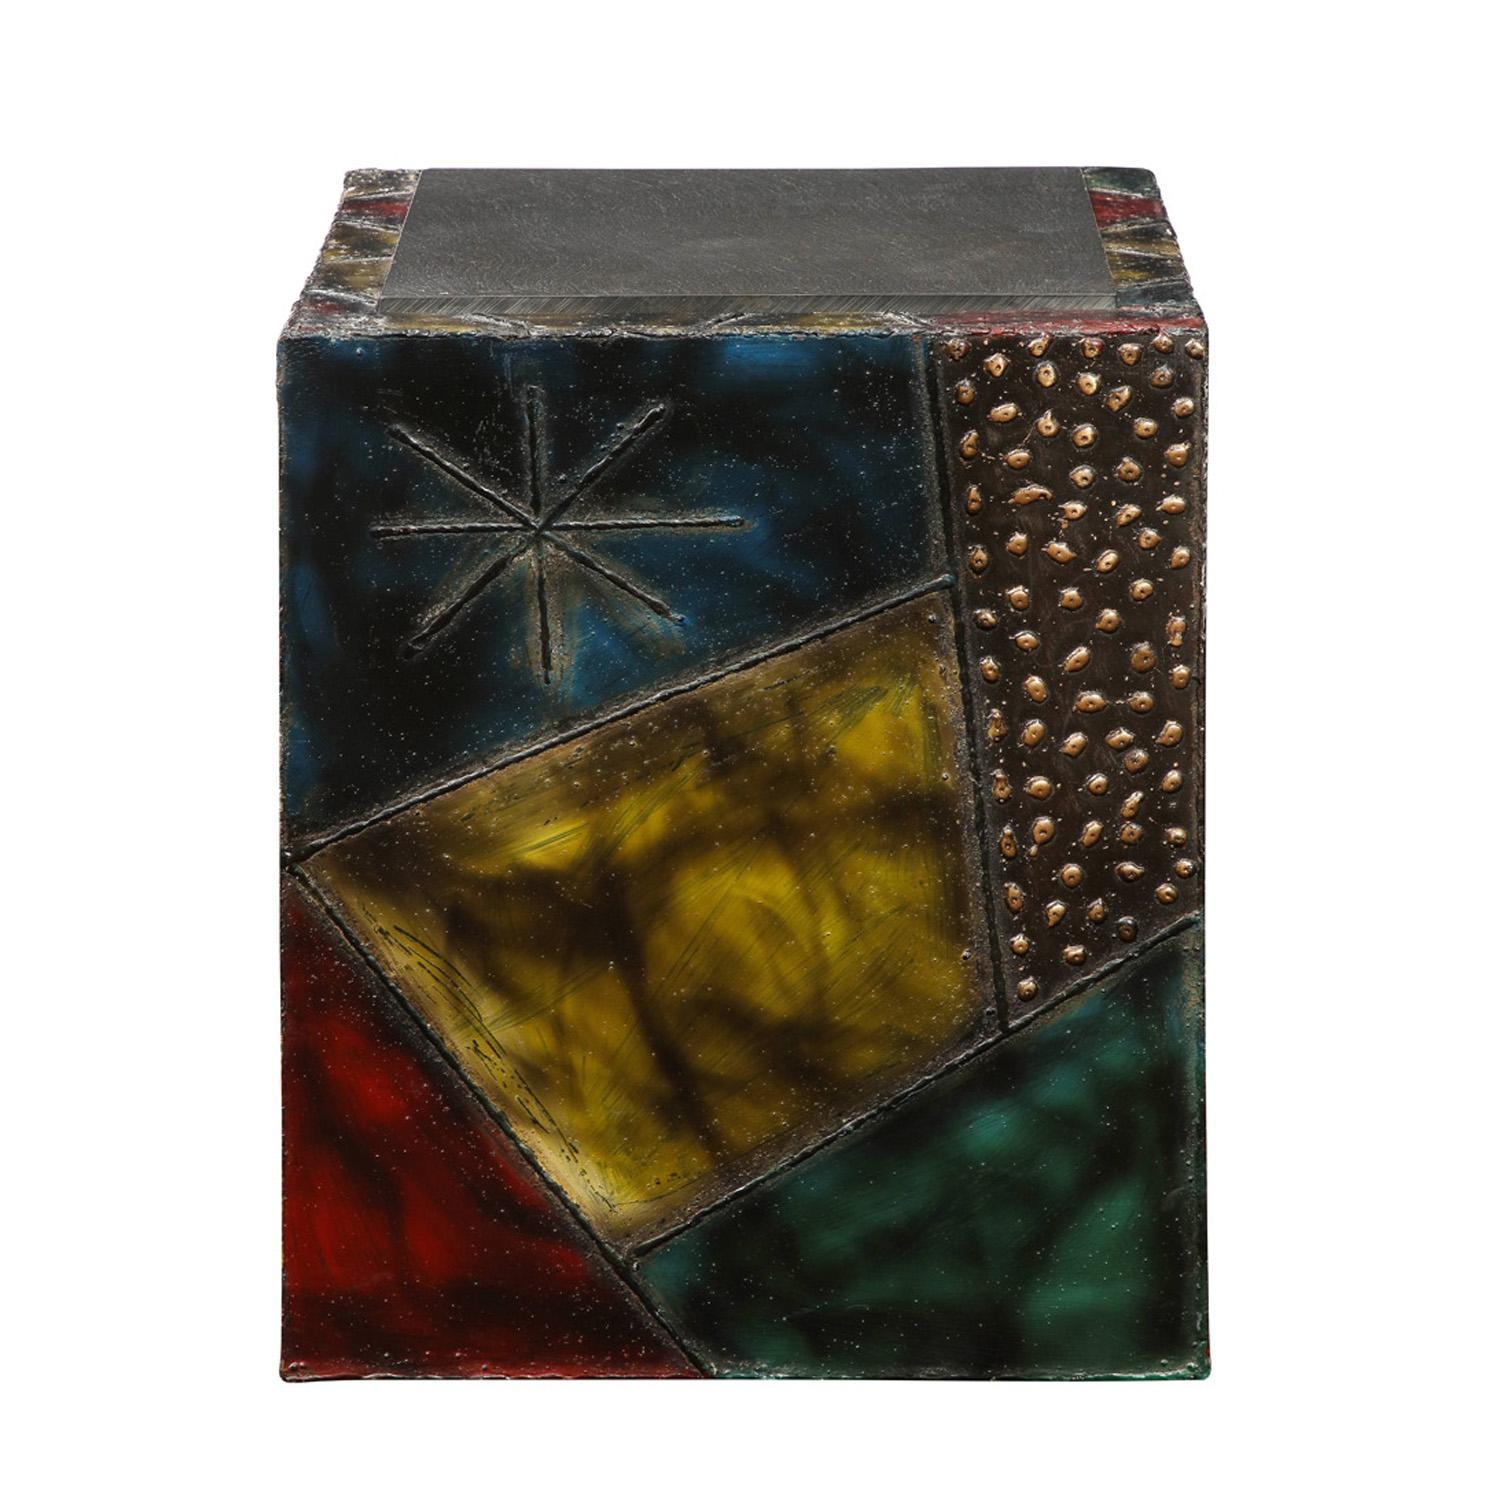 Hand-Crafted Paul Evans Hand-Welded Cube Table with Polychrome Enamels 1973 'Signed'